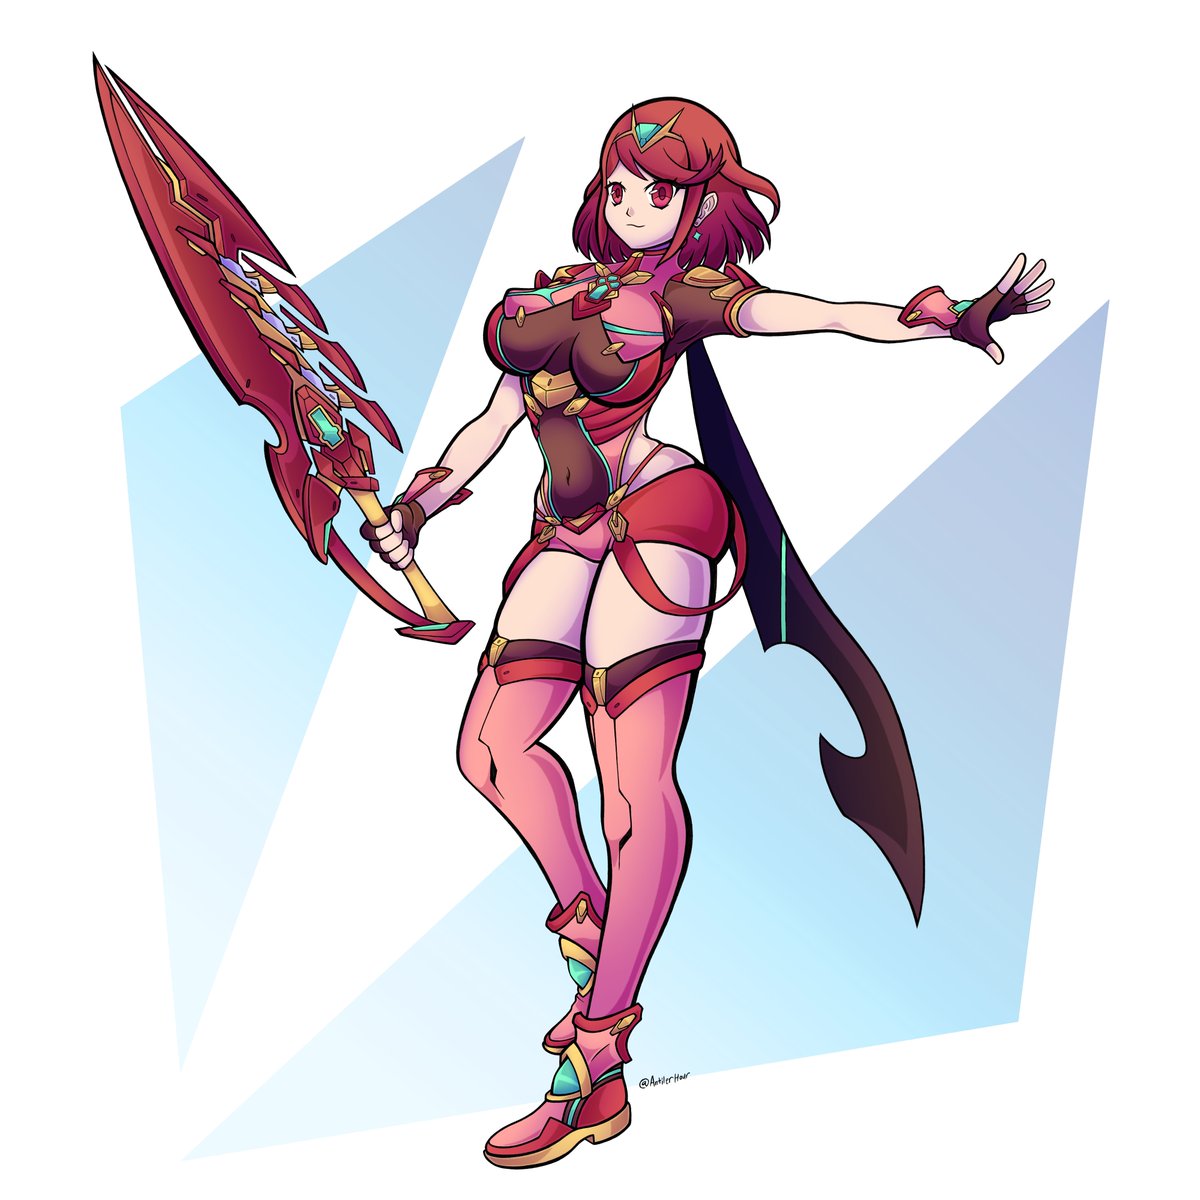 Pyra art is here!
Likes and Retweets appreciated!
#XenobladeChronicles2 #Xenoblade2